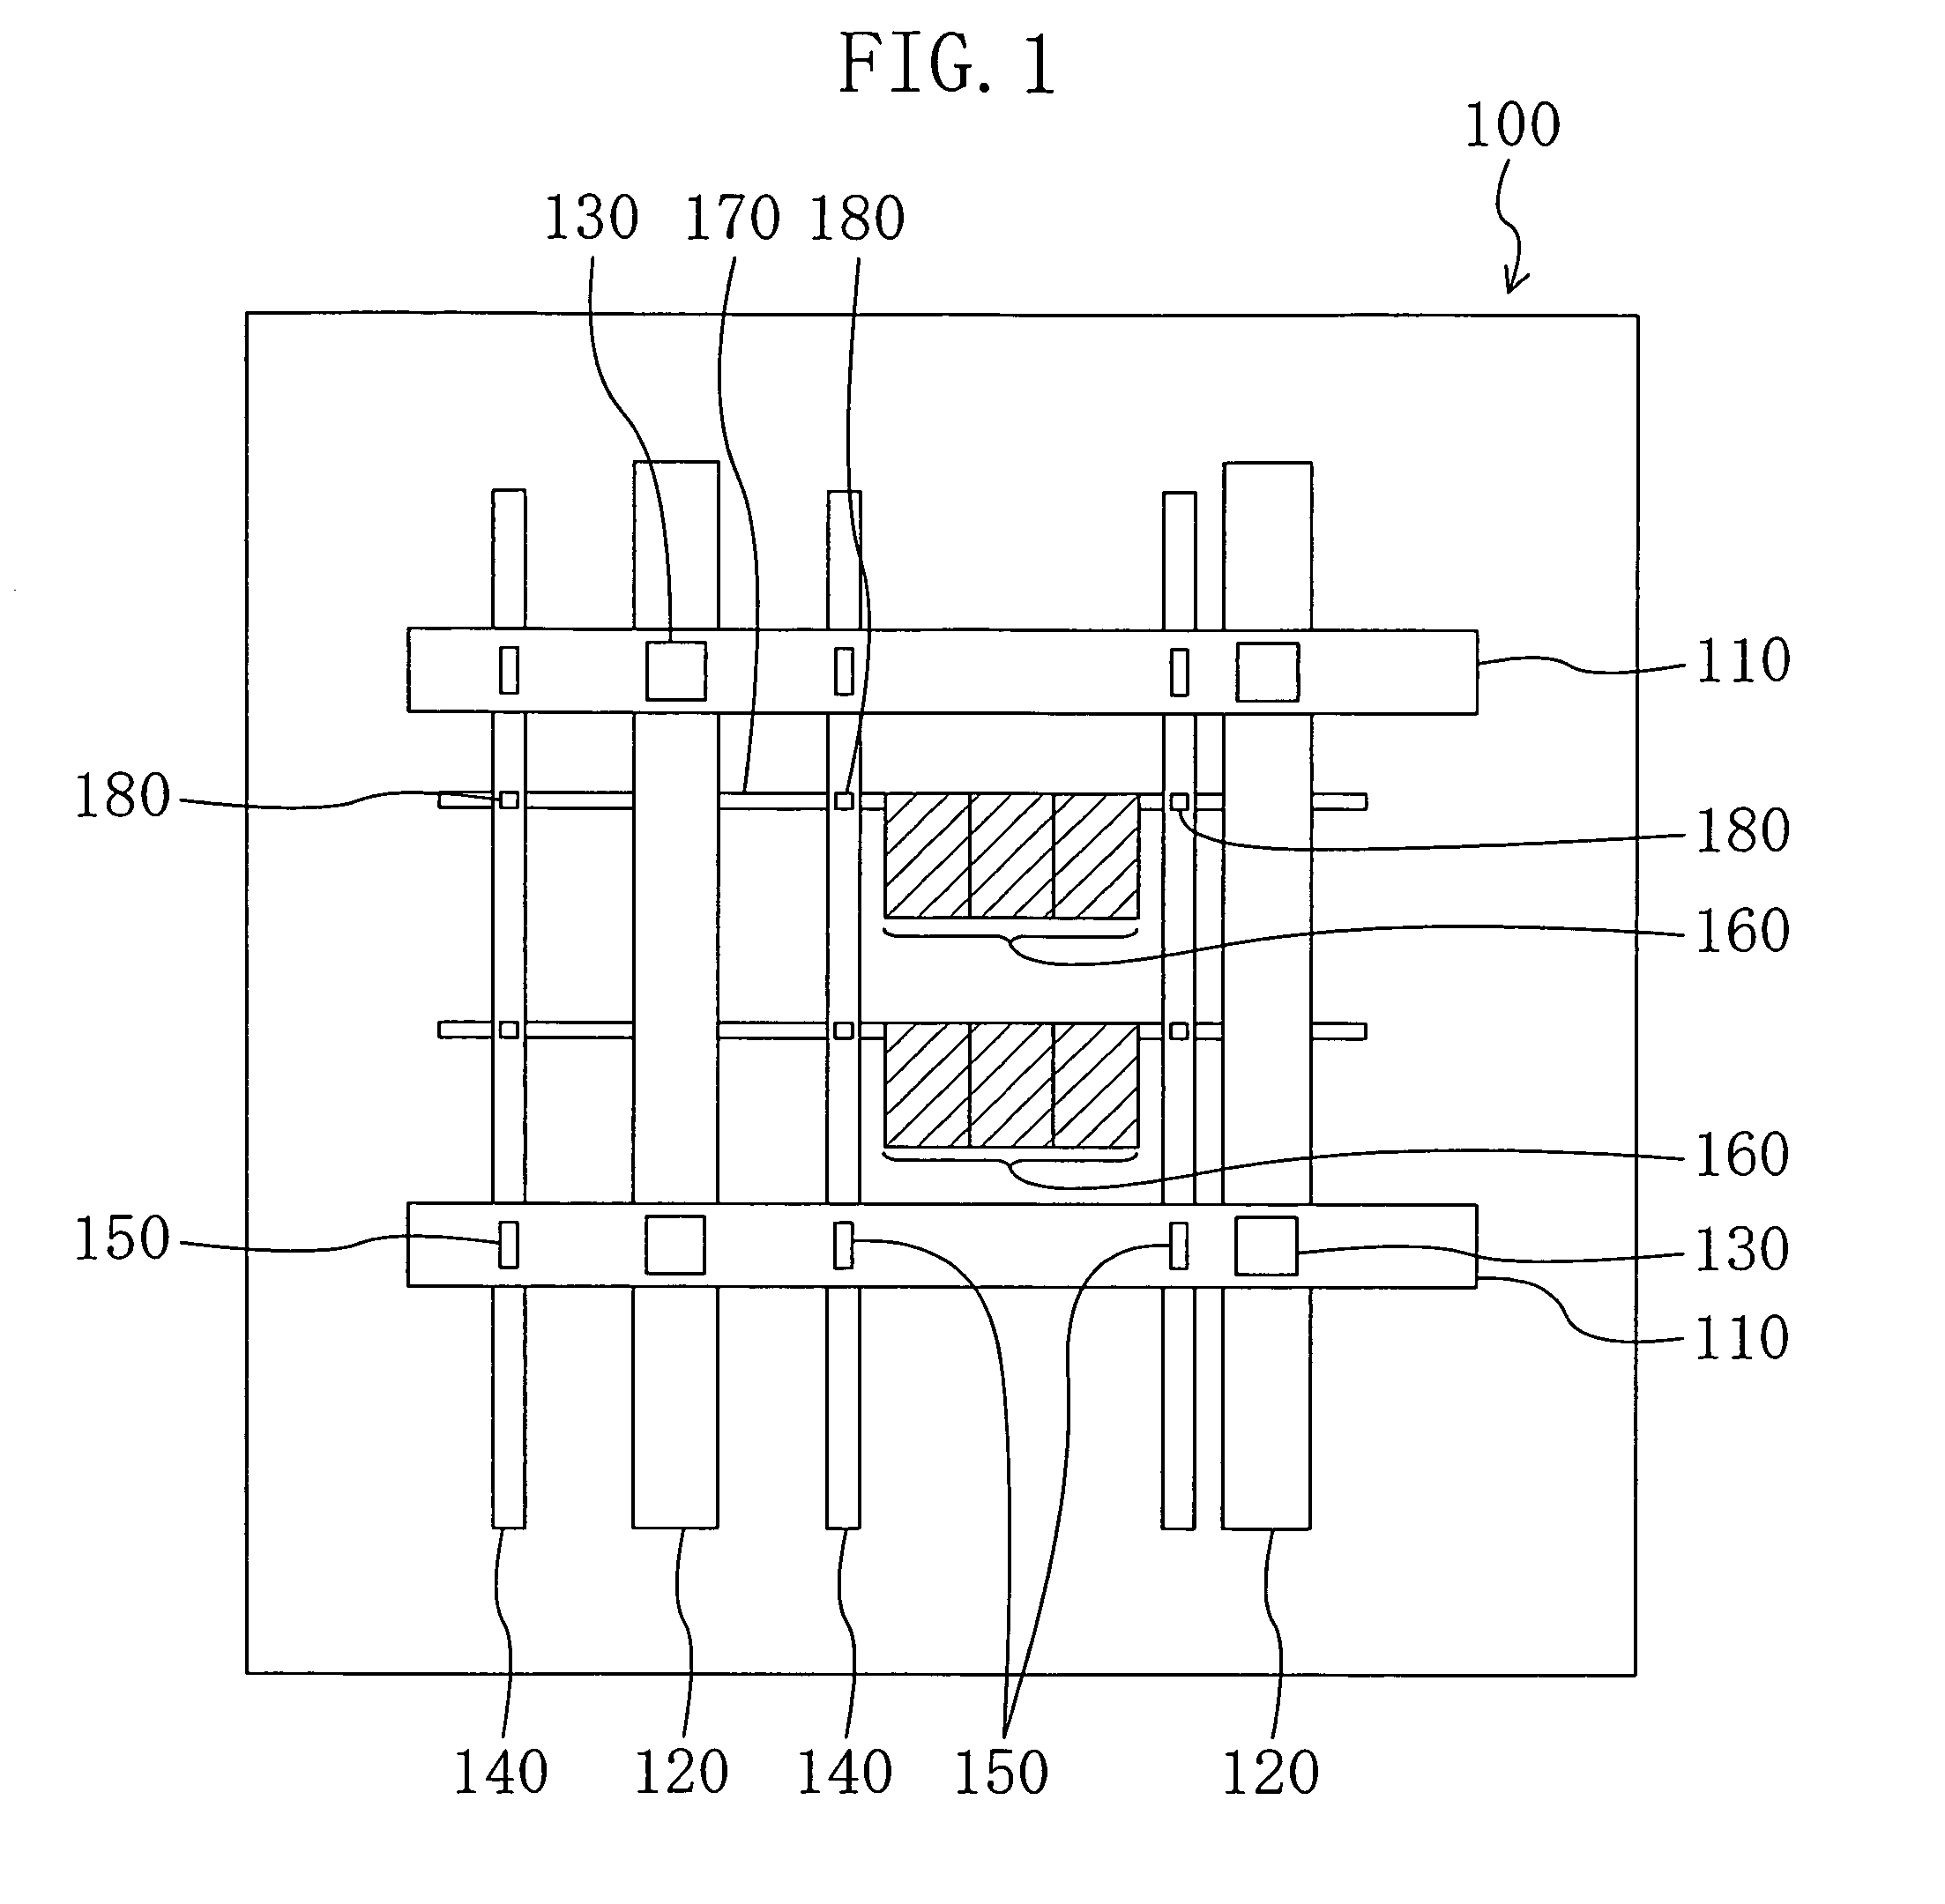 Wiring structure of a semiconductor device